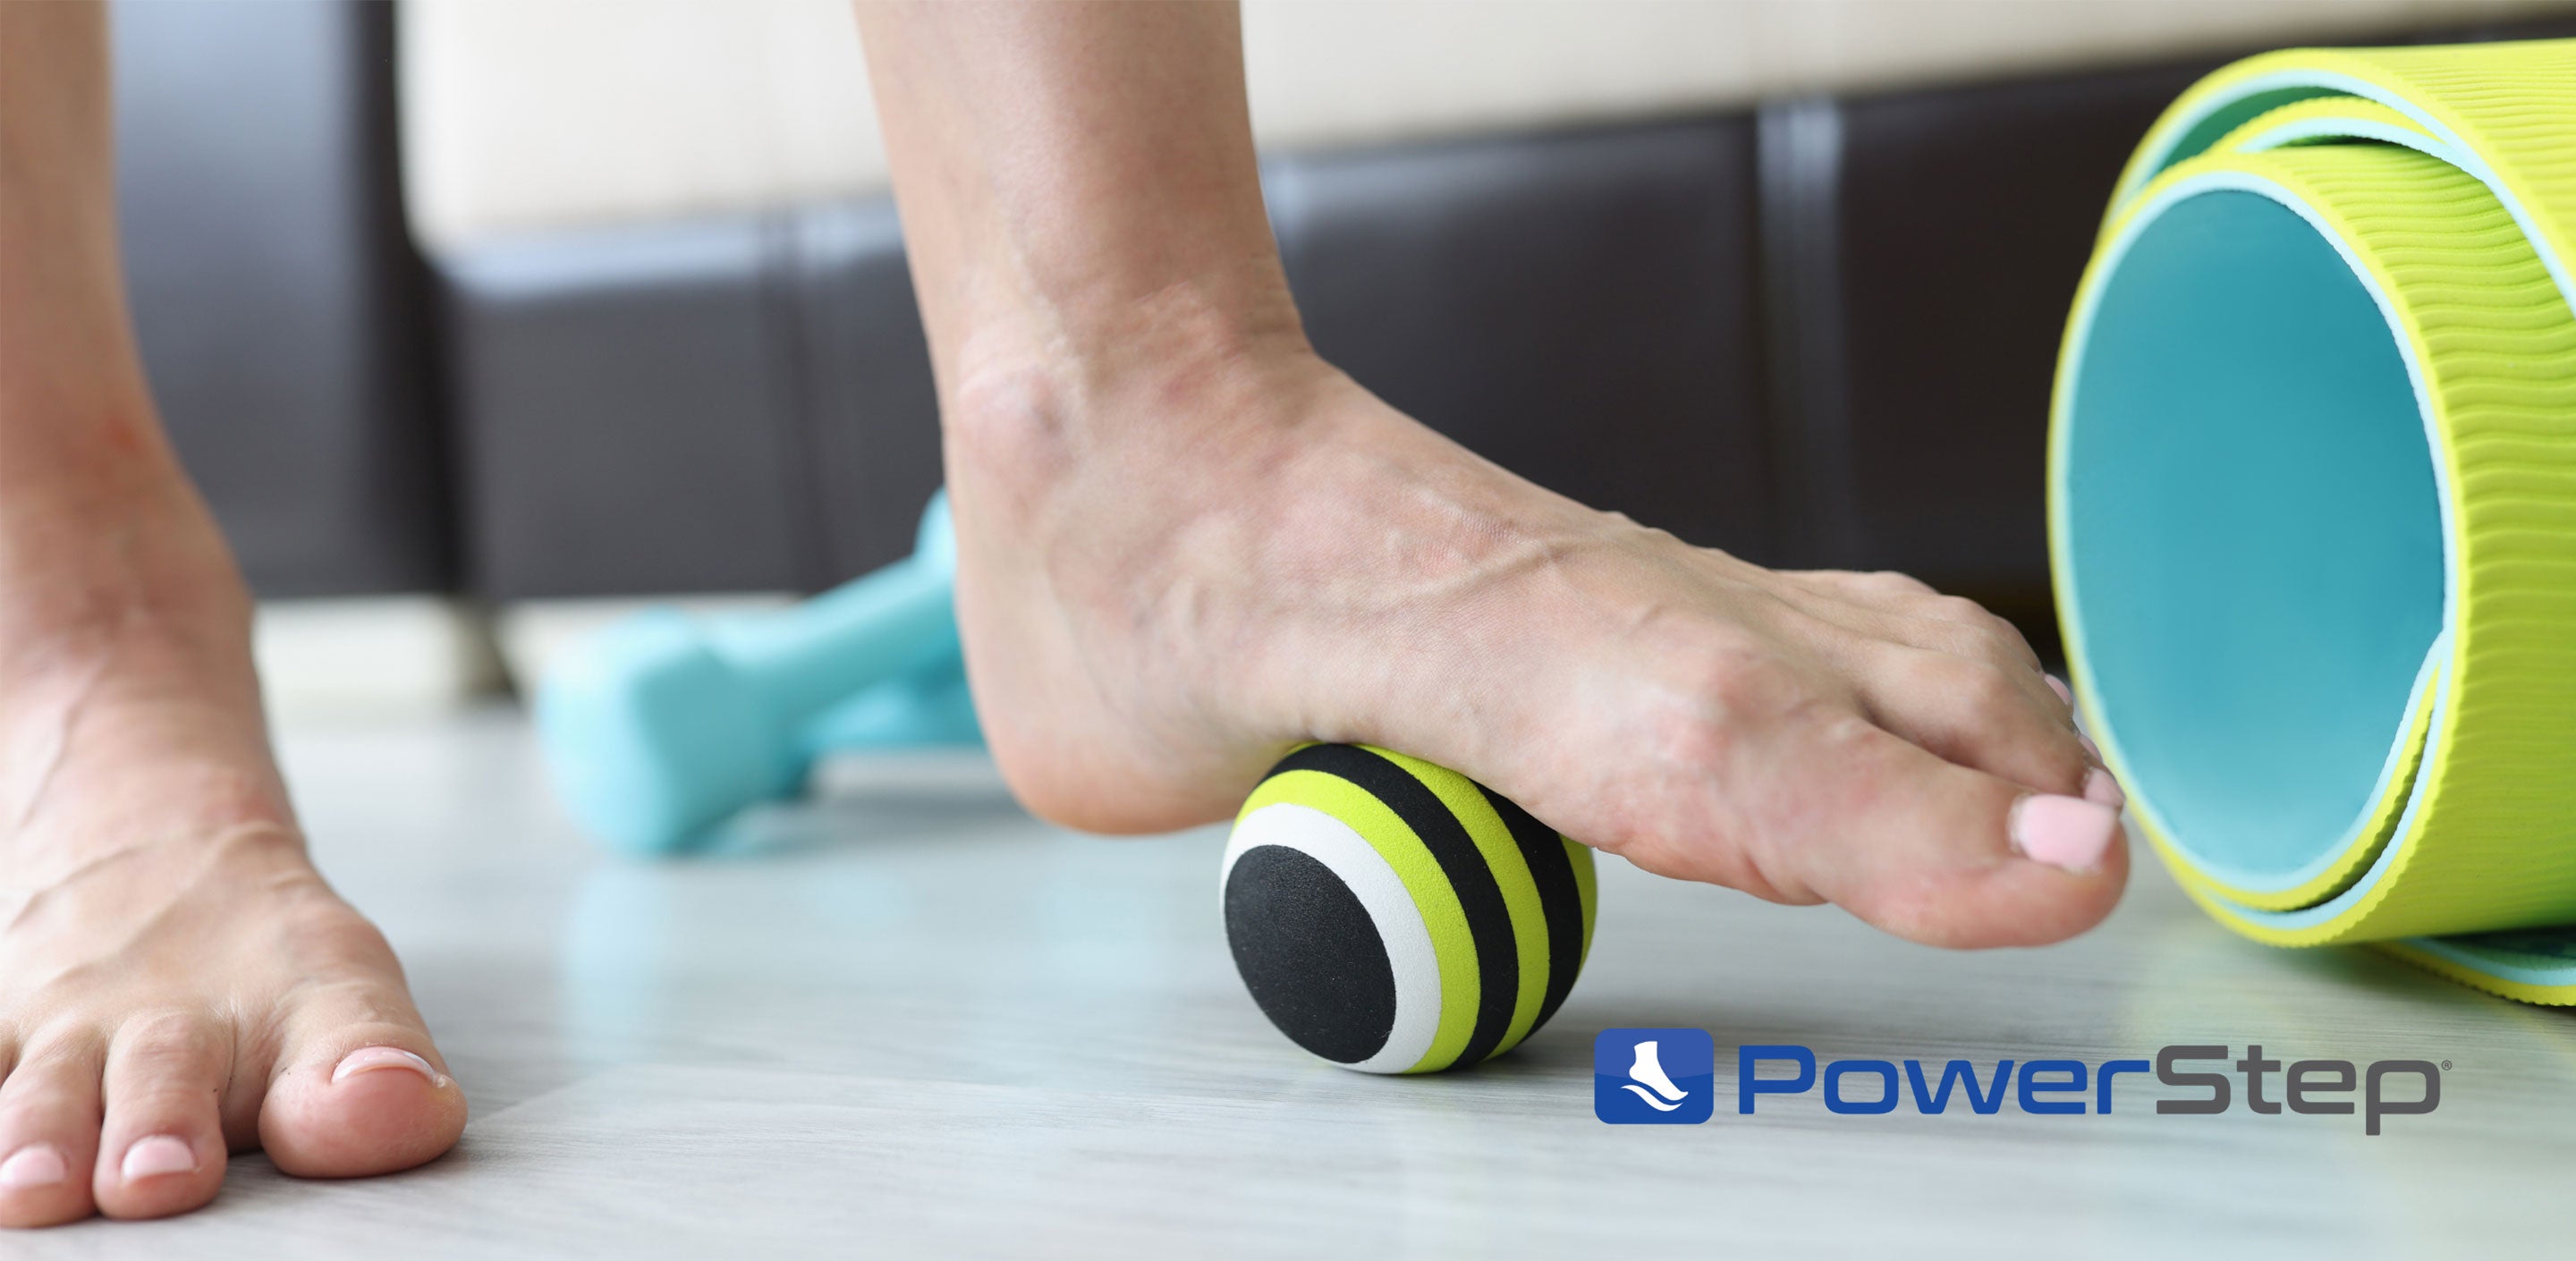 Top 8 Overpronation Exercises by PowerStep